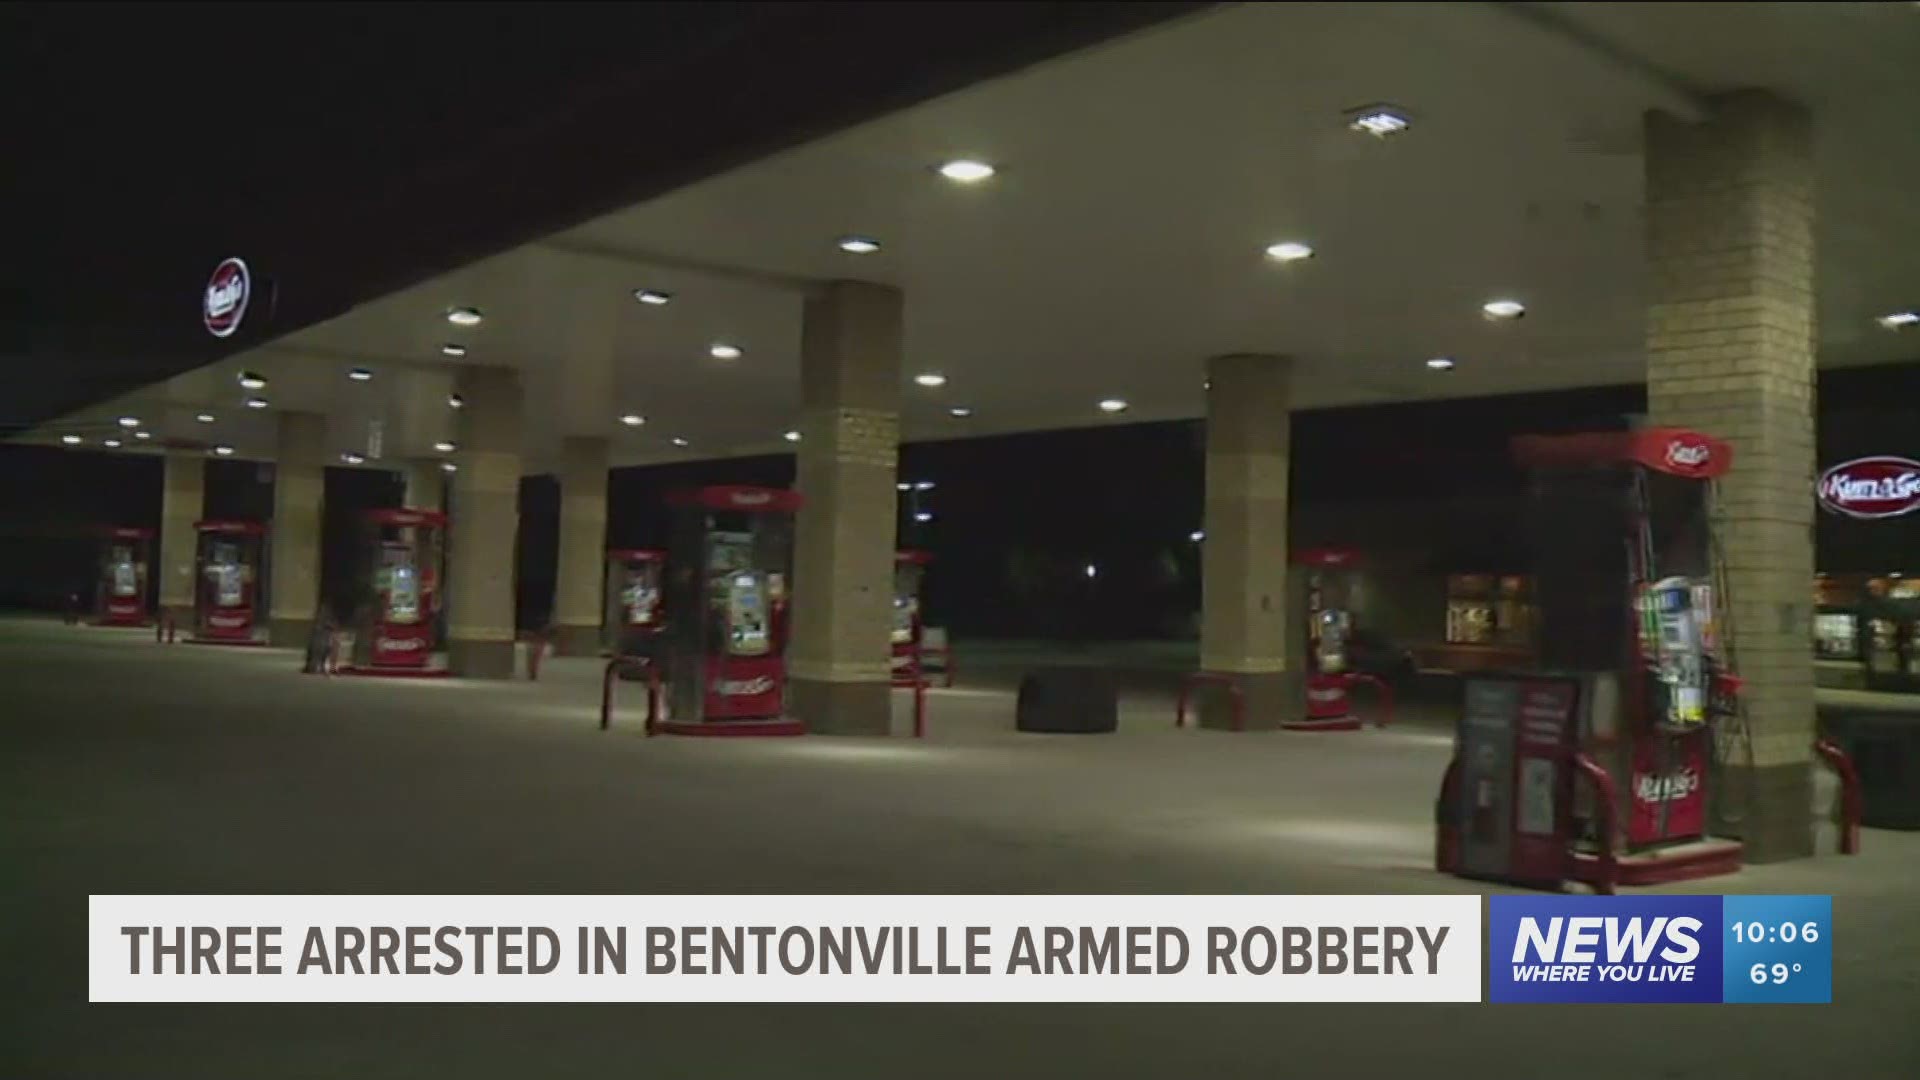 Three men were arrested in connection to an armed robbery at a Kum & Go in Bentonville. https://bit.ly/3kjLaCI